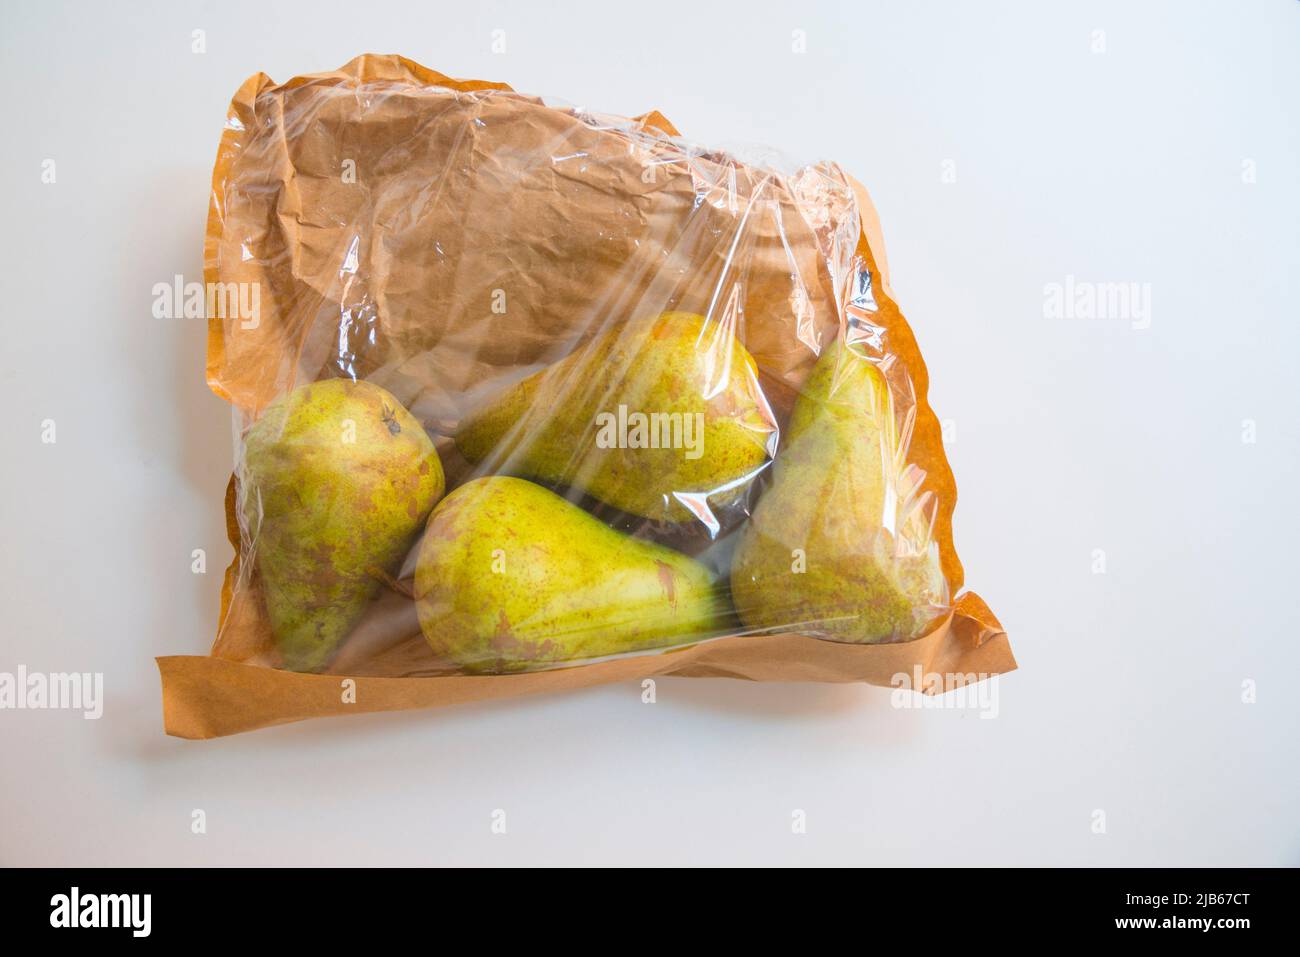 Four pears in a paper bag. Stock Photo